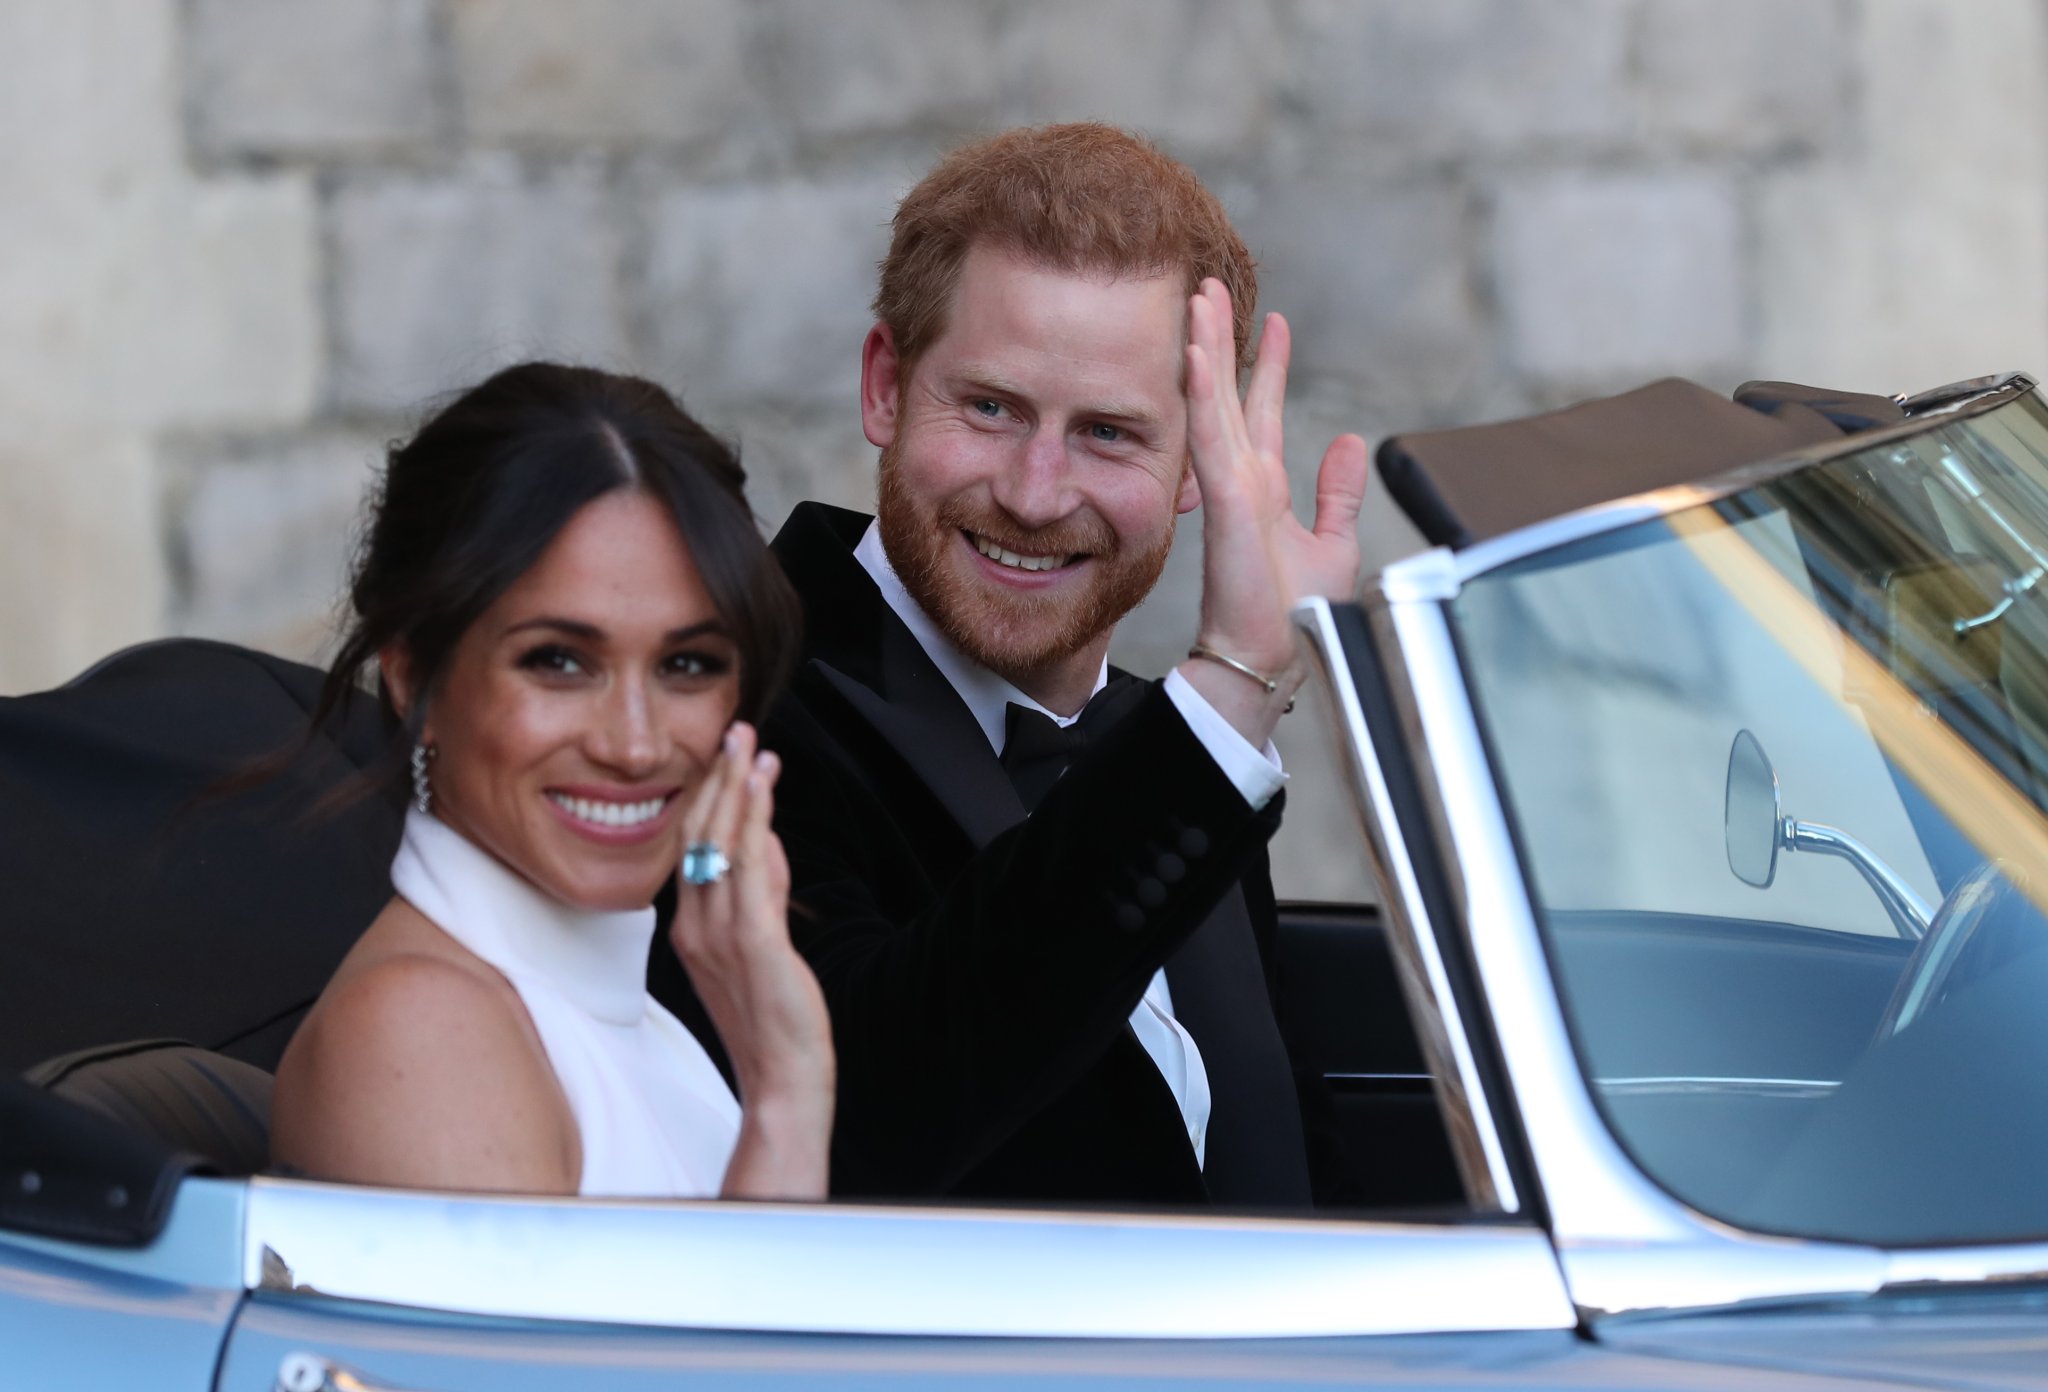 Prince Harry and Meghan Markle Announce They Will Be Stepping Back As Senior Members Of The Royal Family